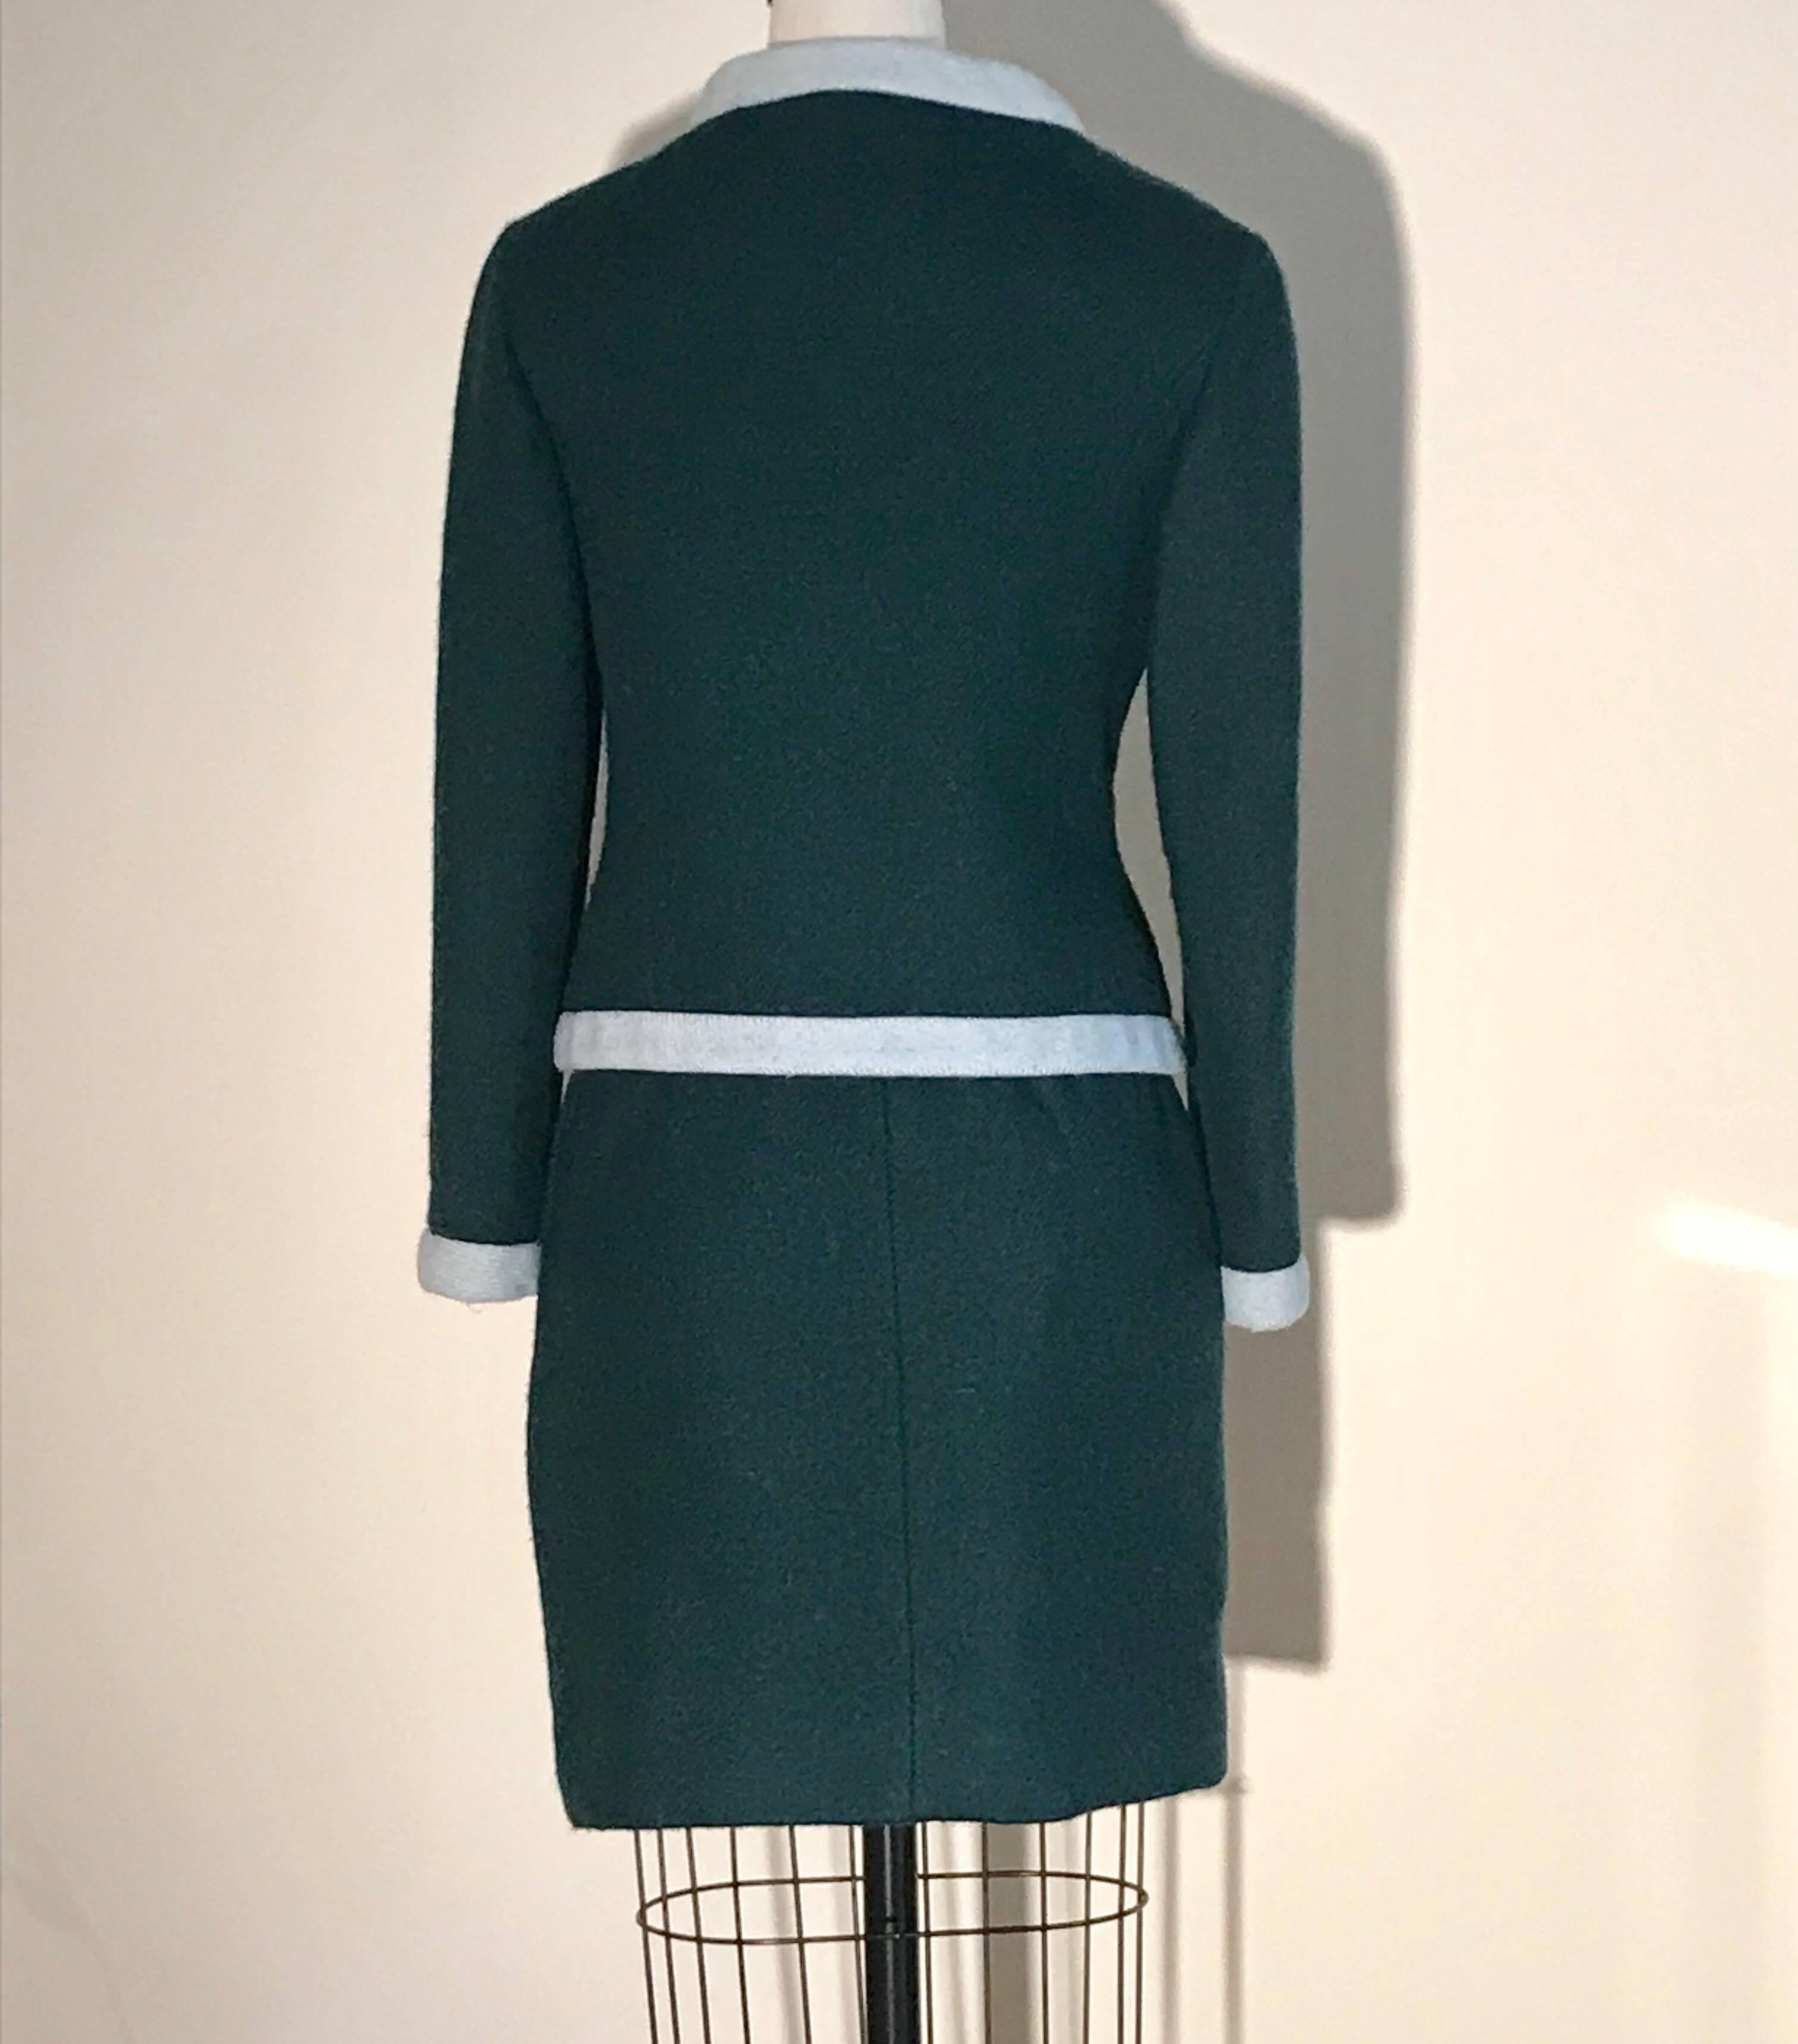 Vintage 1960s Jacques Heim for Jeannes Filles green skirt suit with light blue trim made for retailer Bonwit Teller. Side zip and hook and eye at skirt, five buttons at jacket front. .
(Color is truest in closeup photos.)

No content label, feels